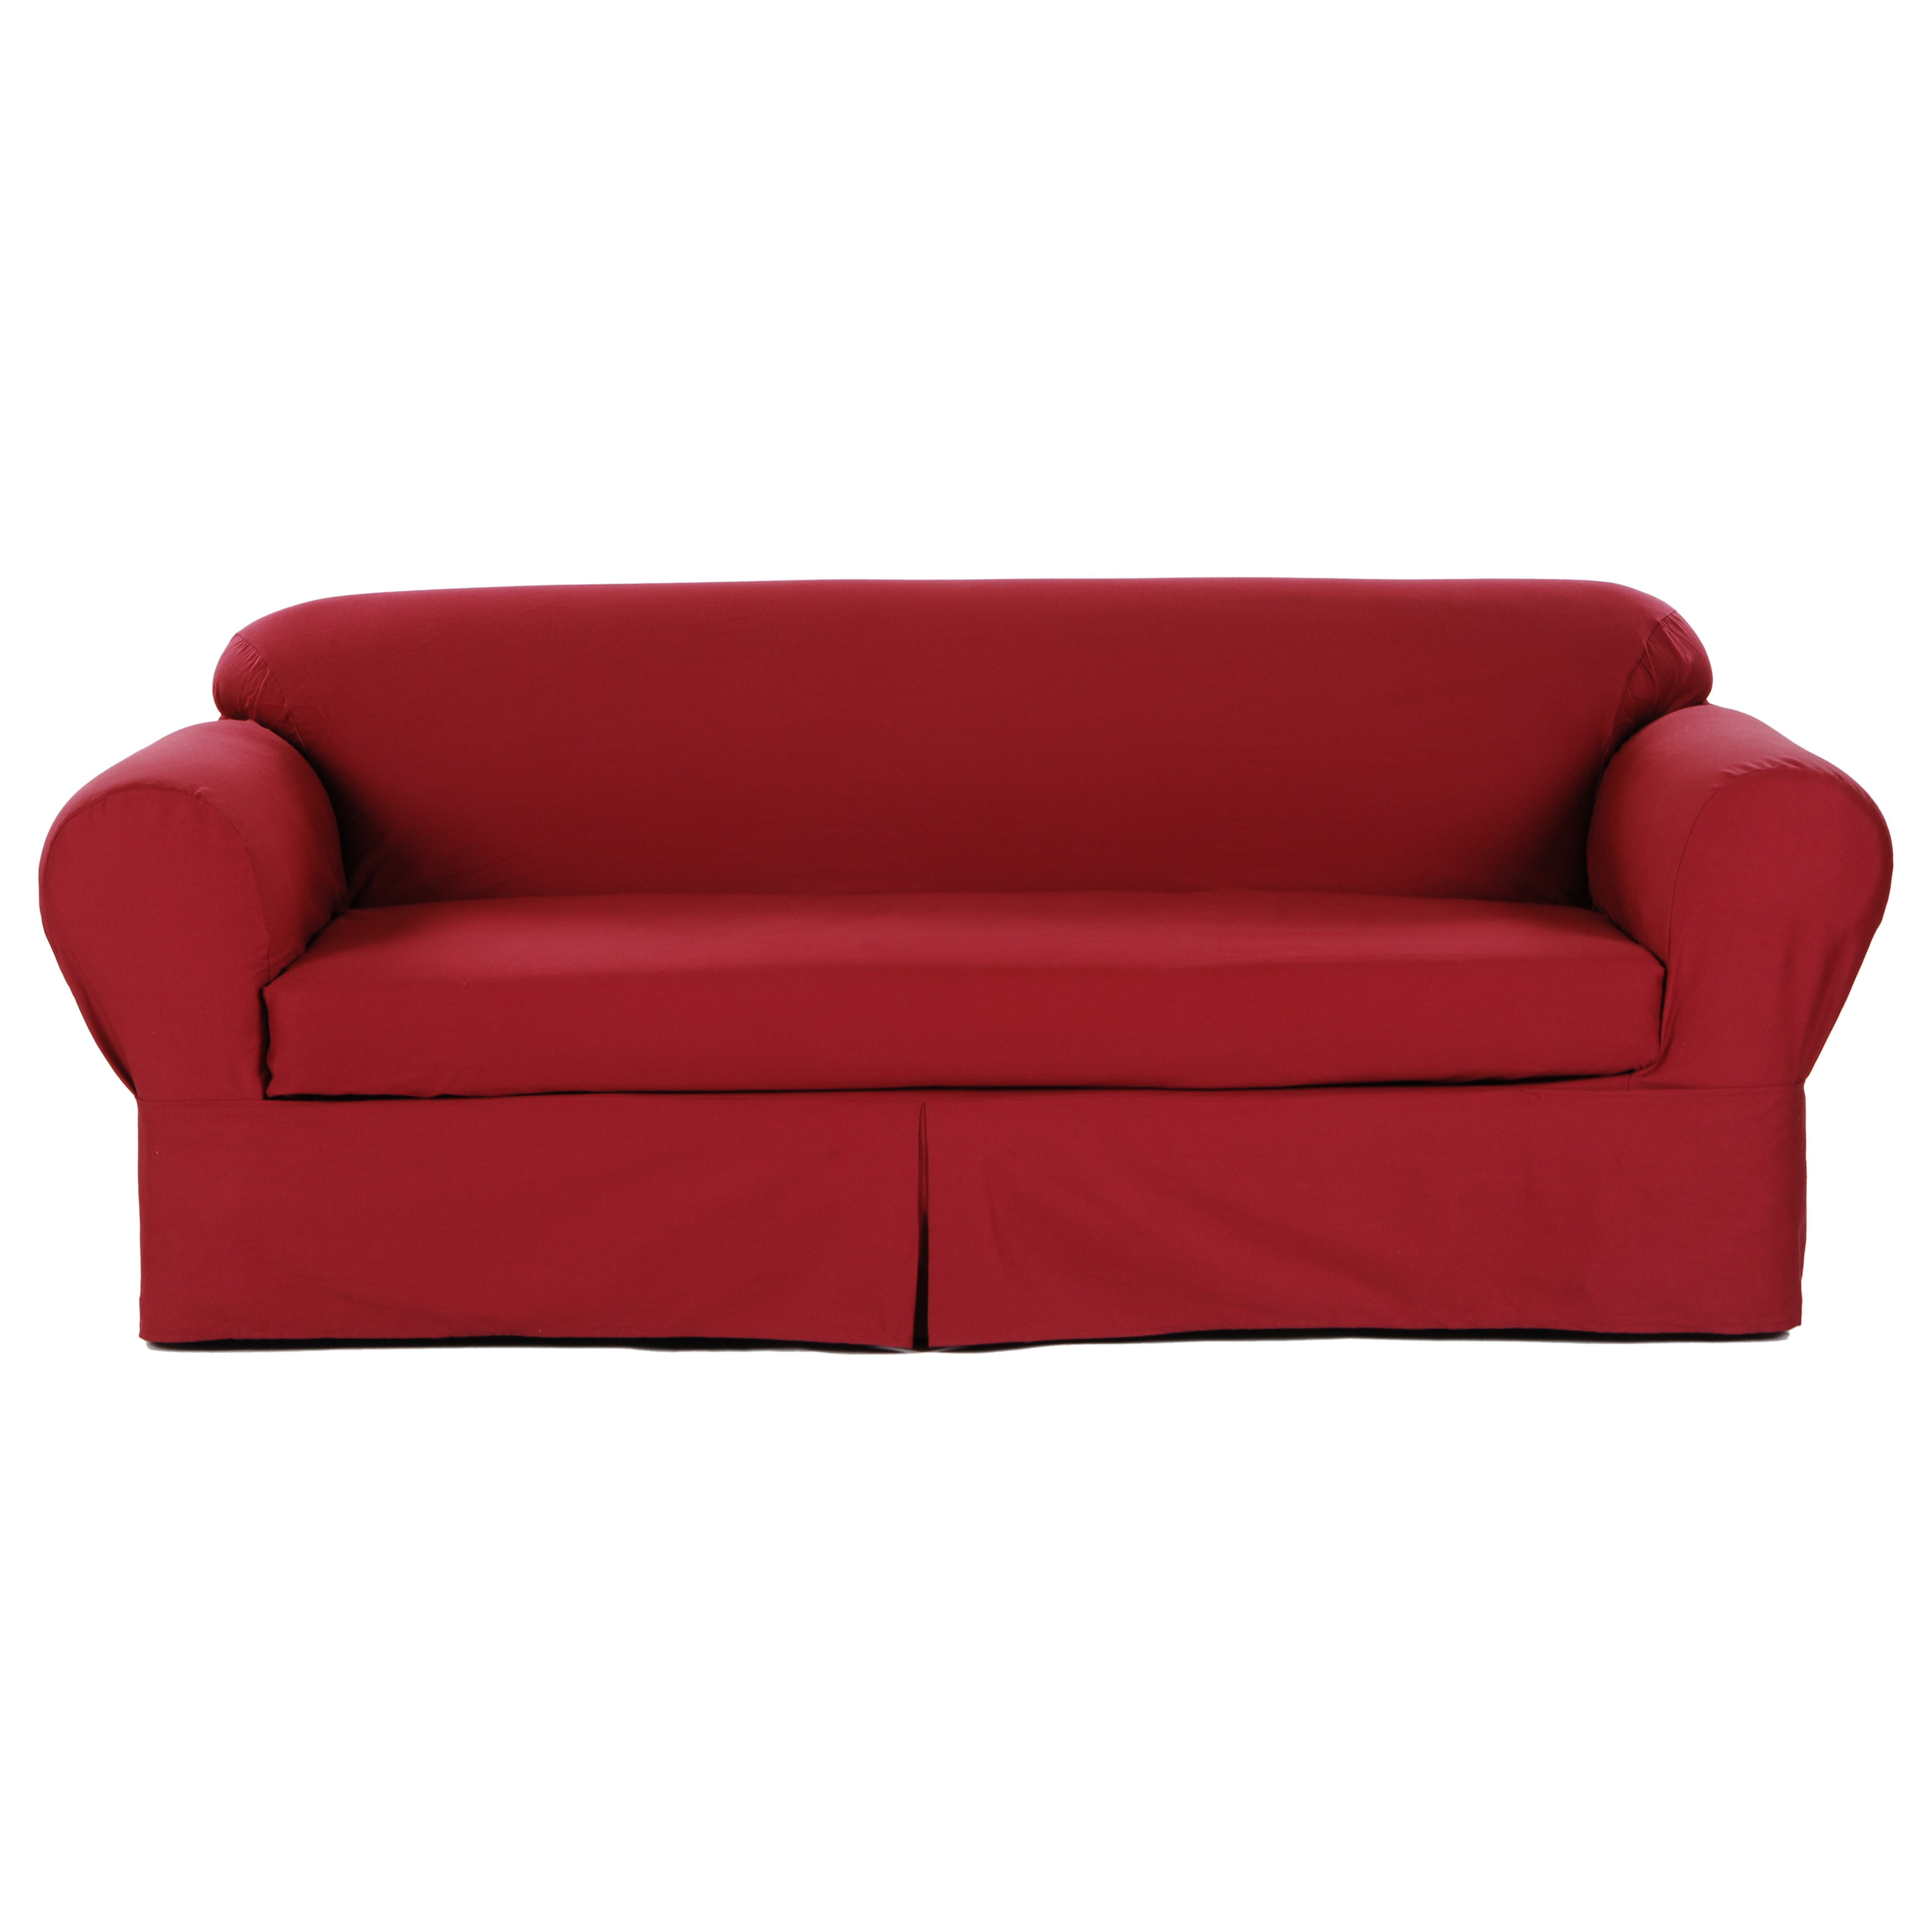 Classic Slipcovers Classic Twopiece Twill Sofa Slipcover